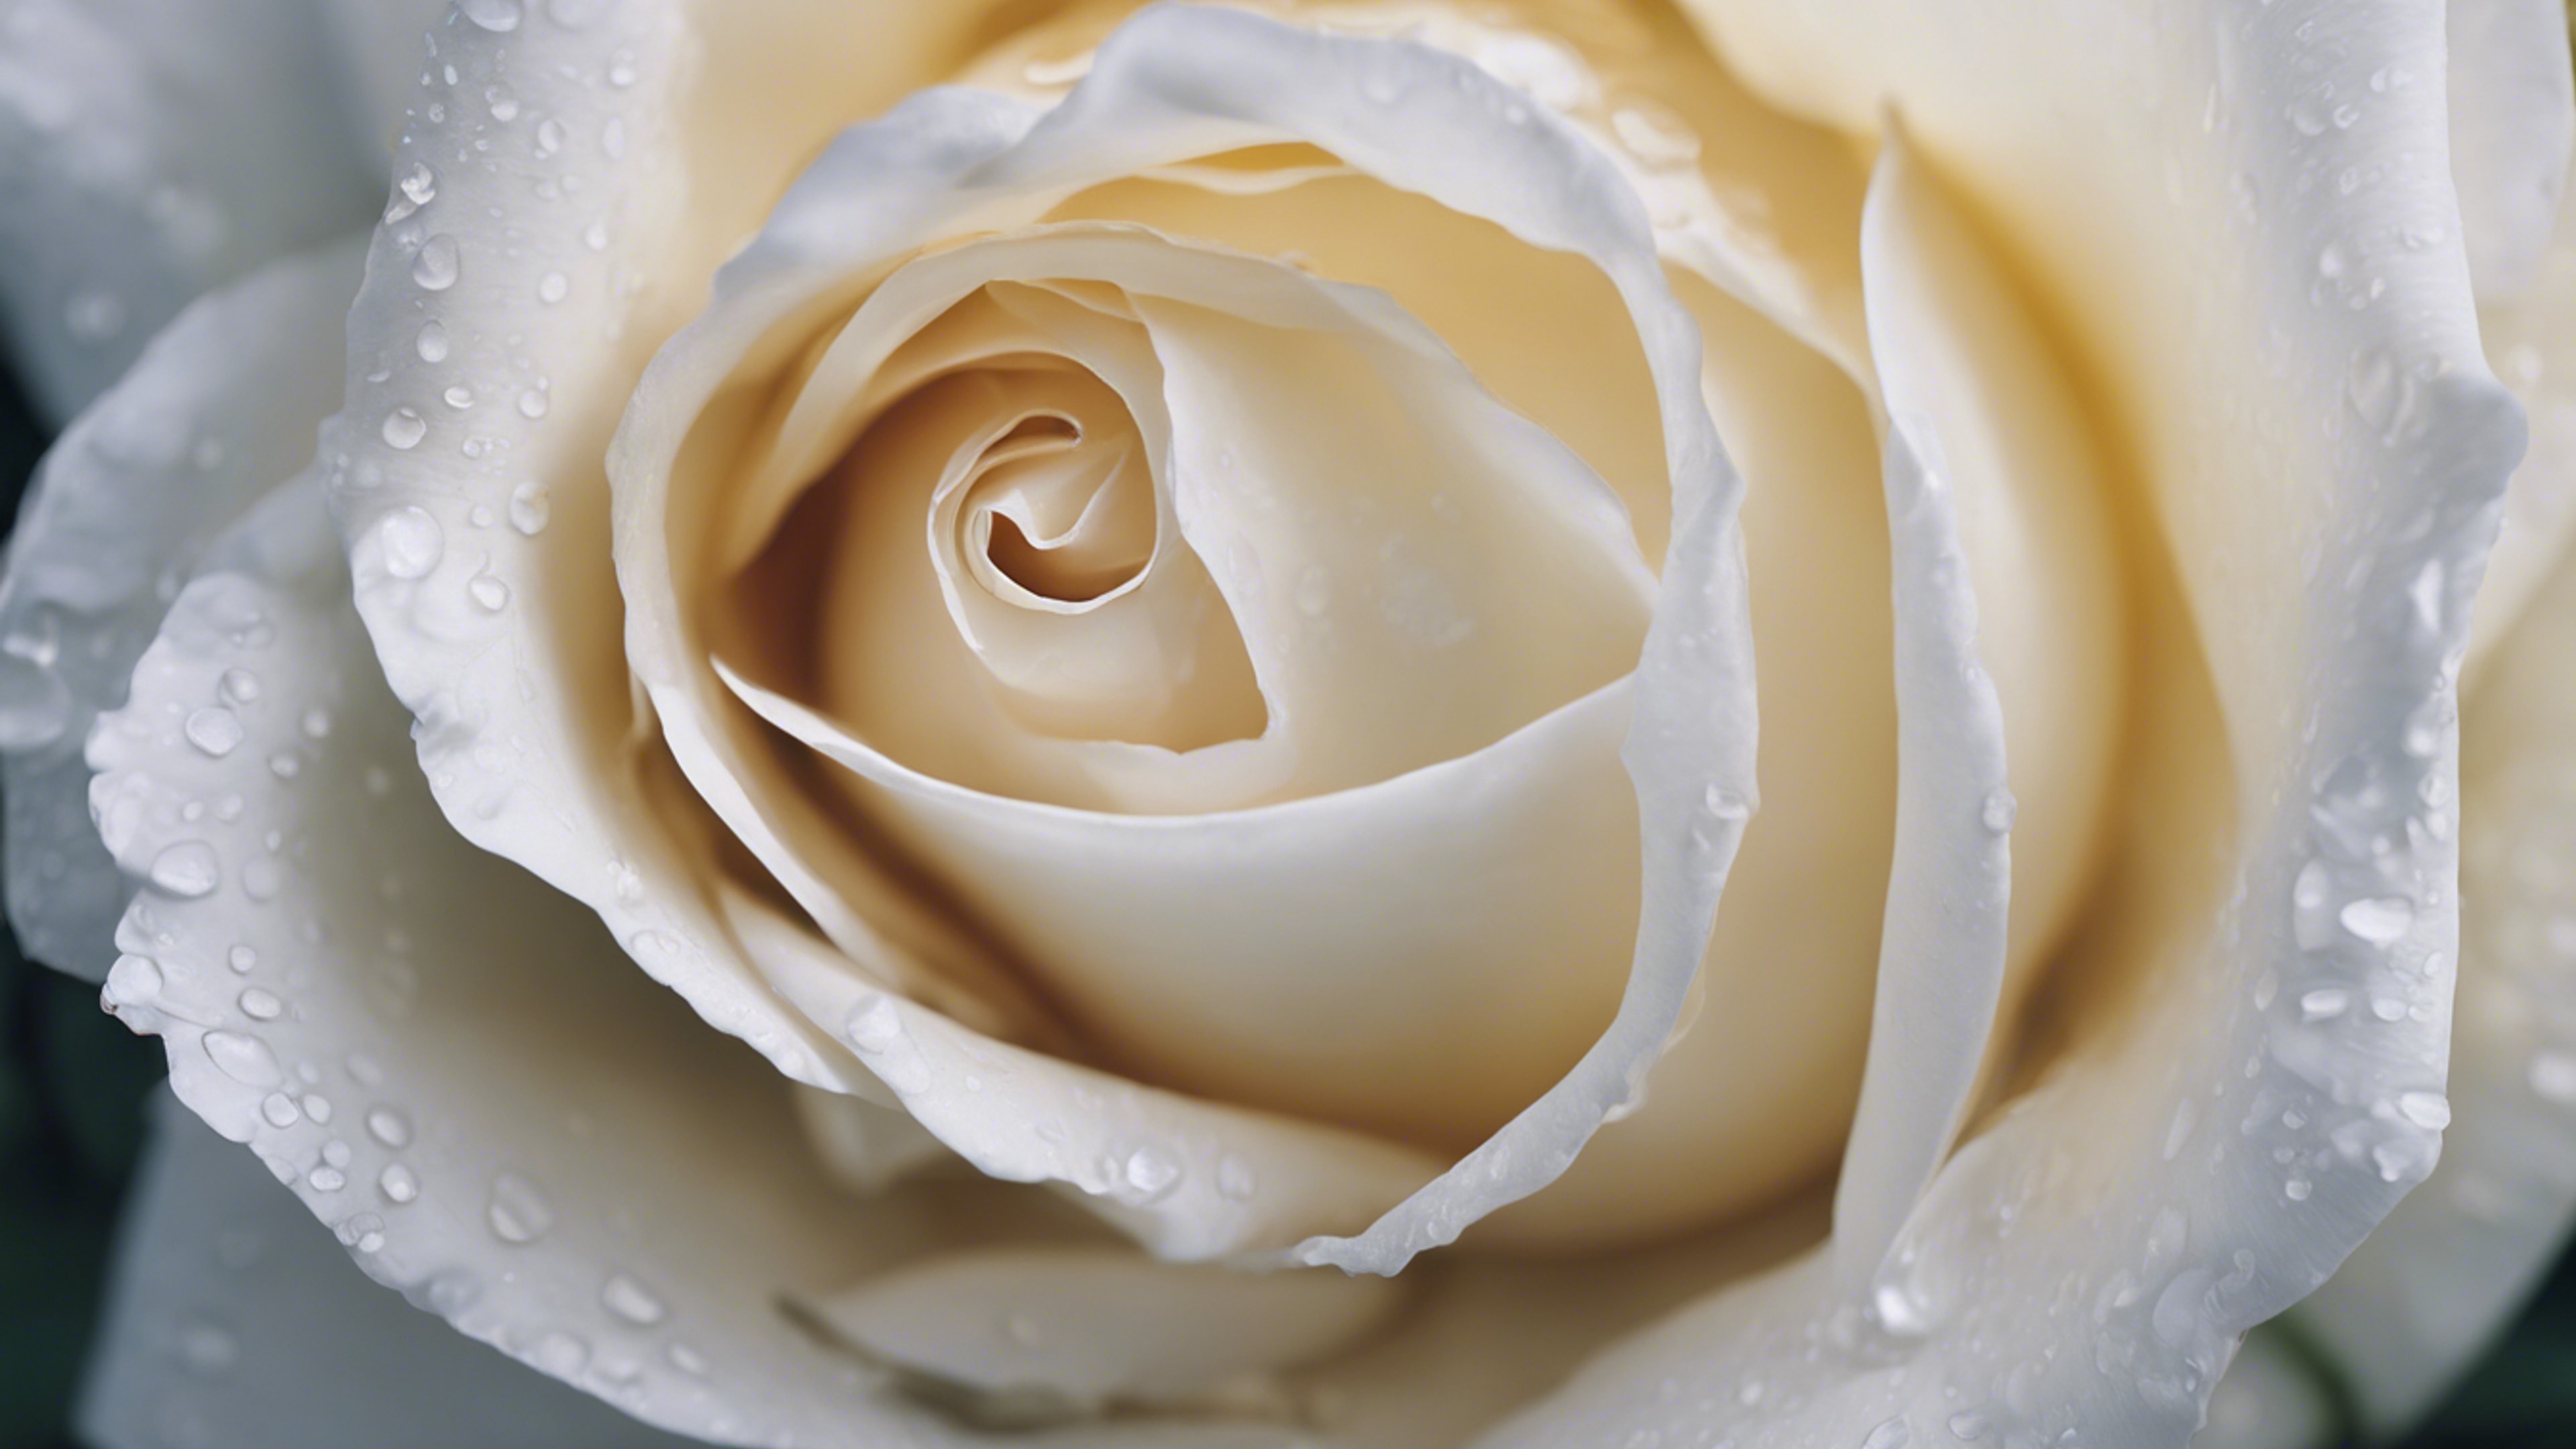 Zoomed view of the velvety petals of a white rose. Kertas dinding[9ebd1bf4e1a74c36ba13]